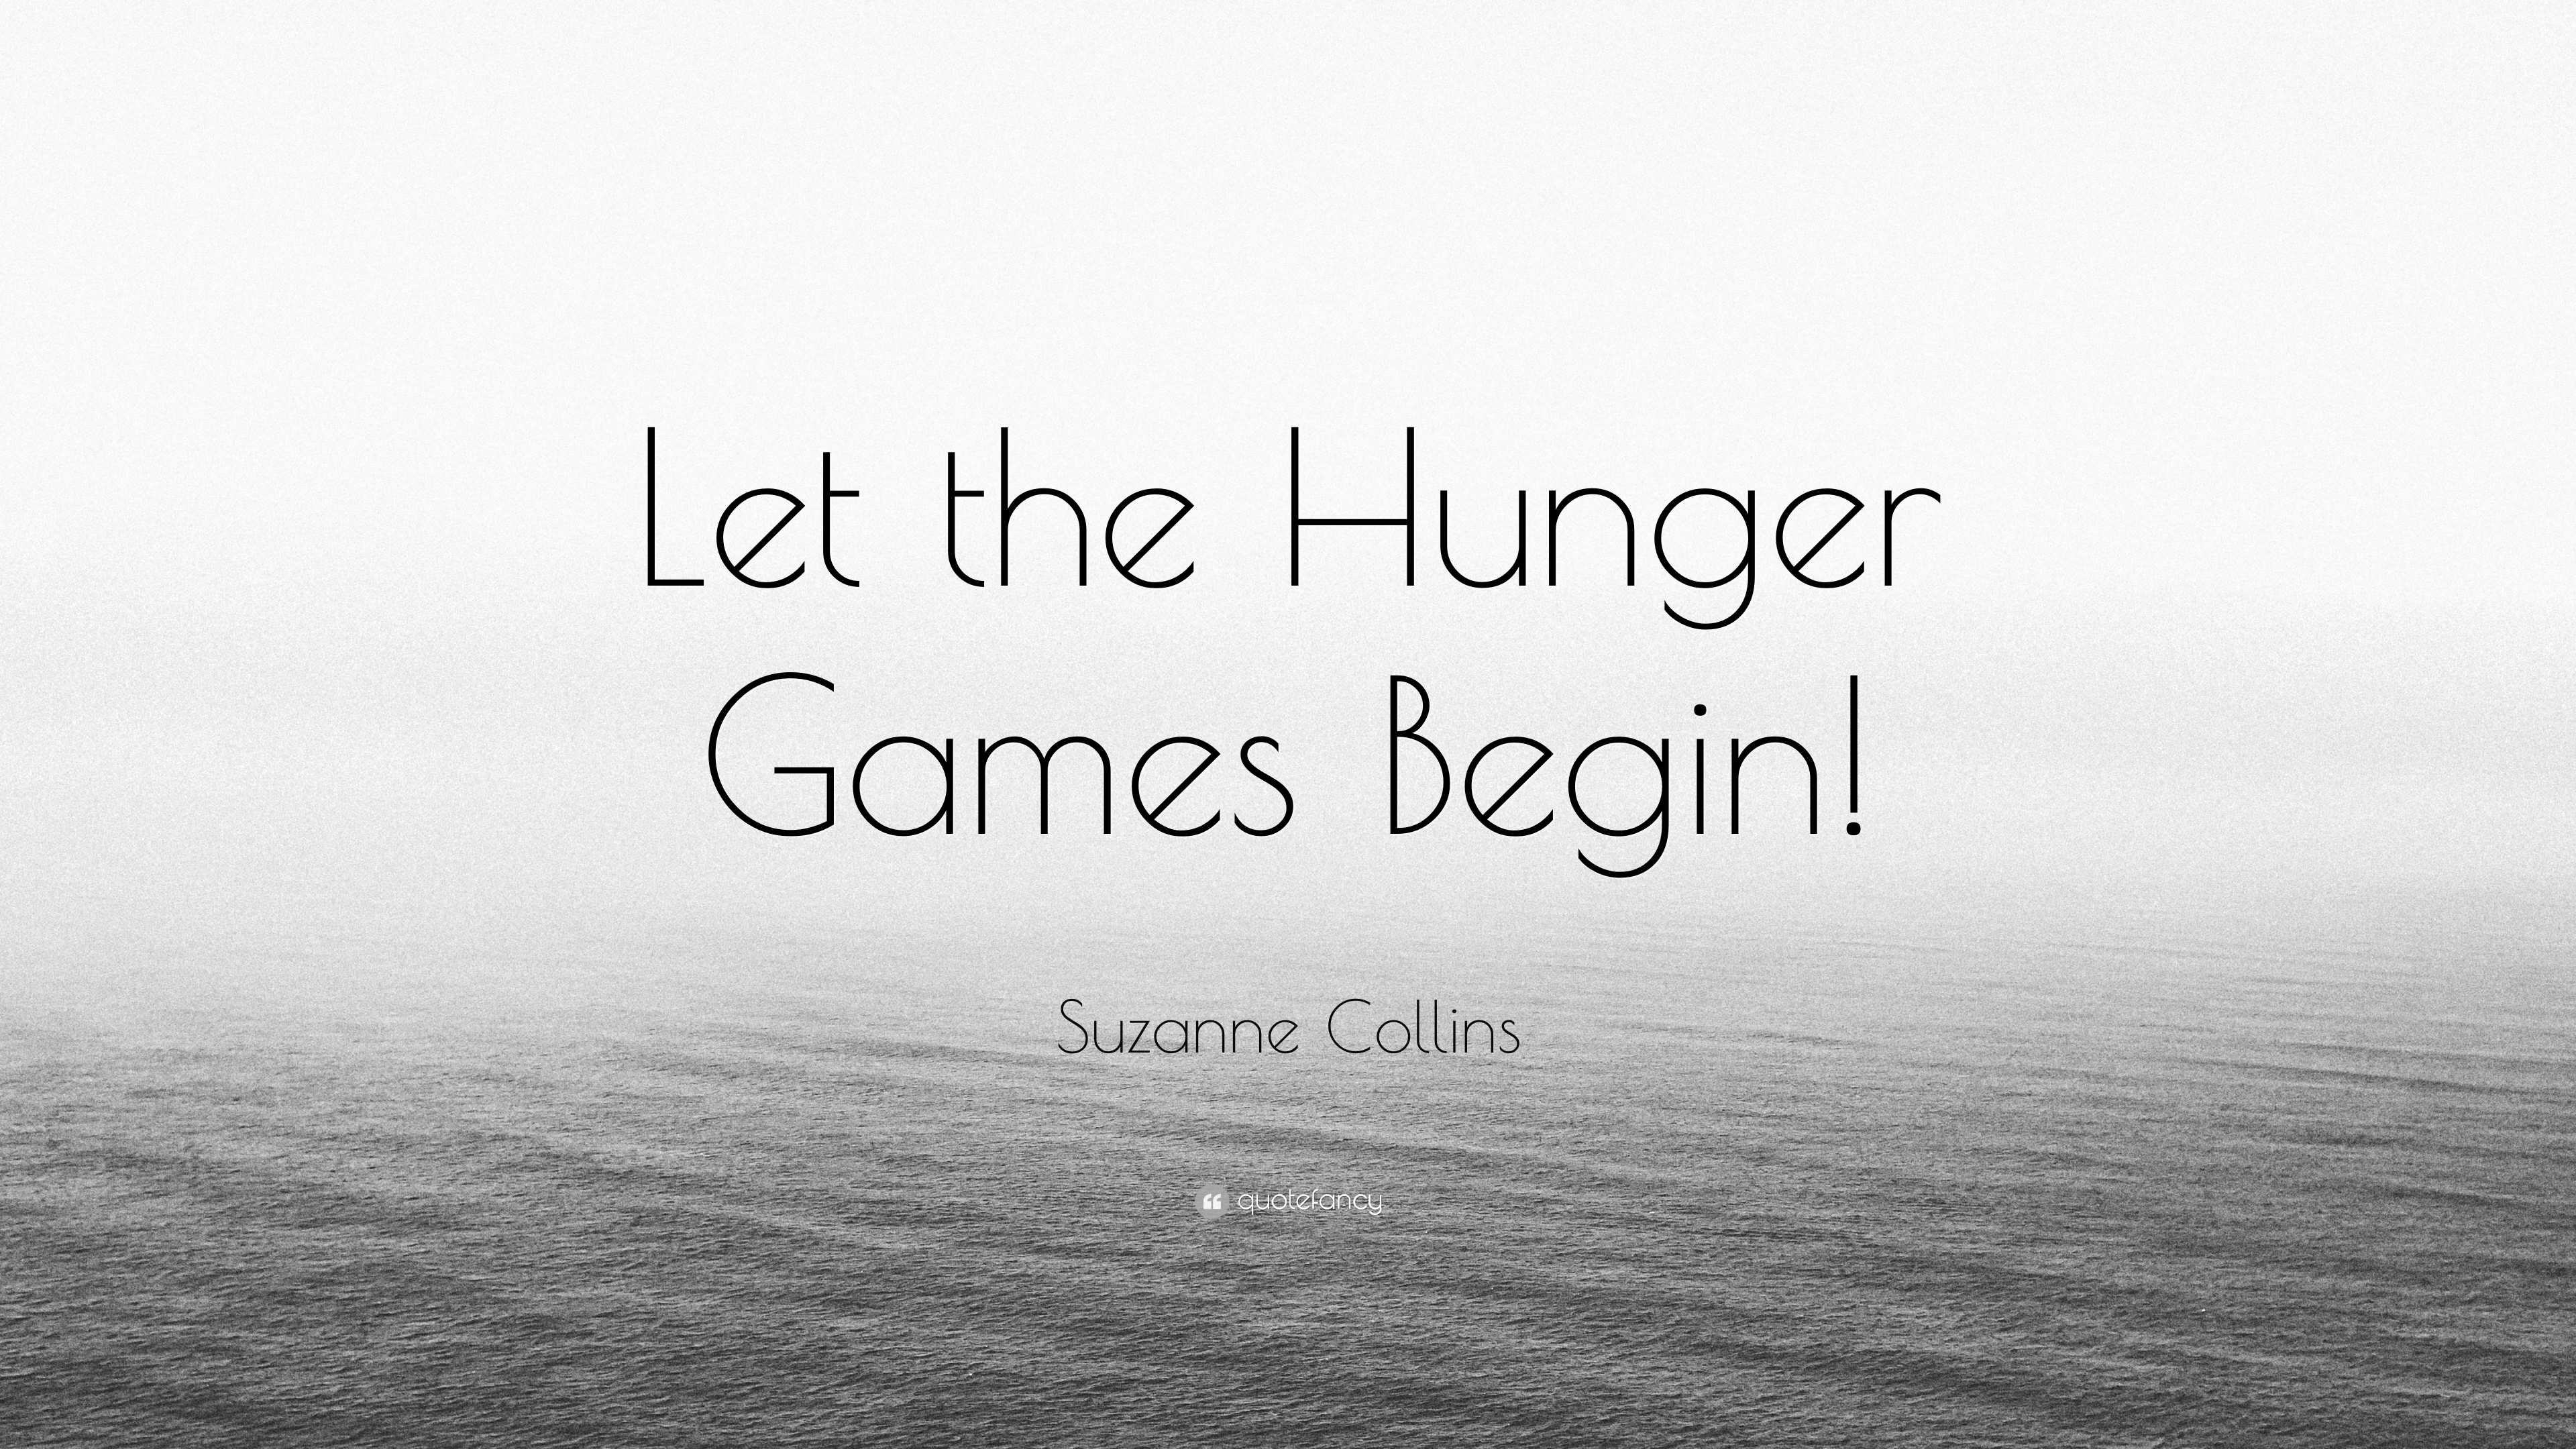 let the hunger games begin - Am I the only one